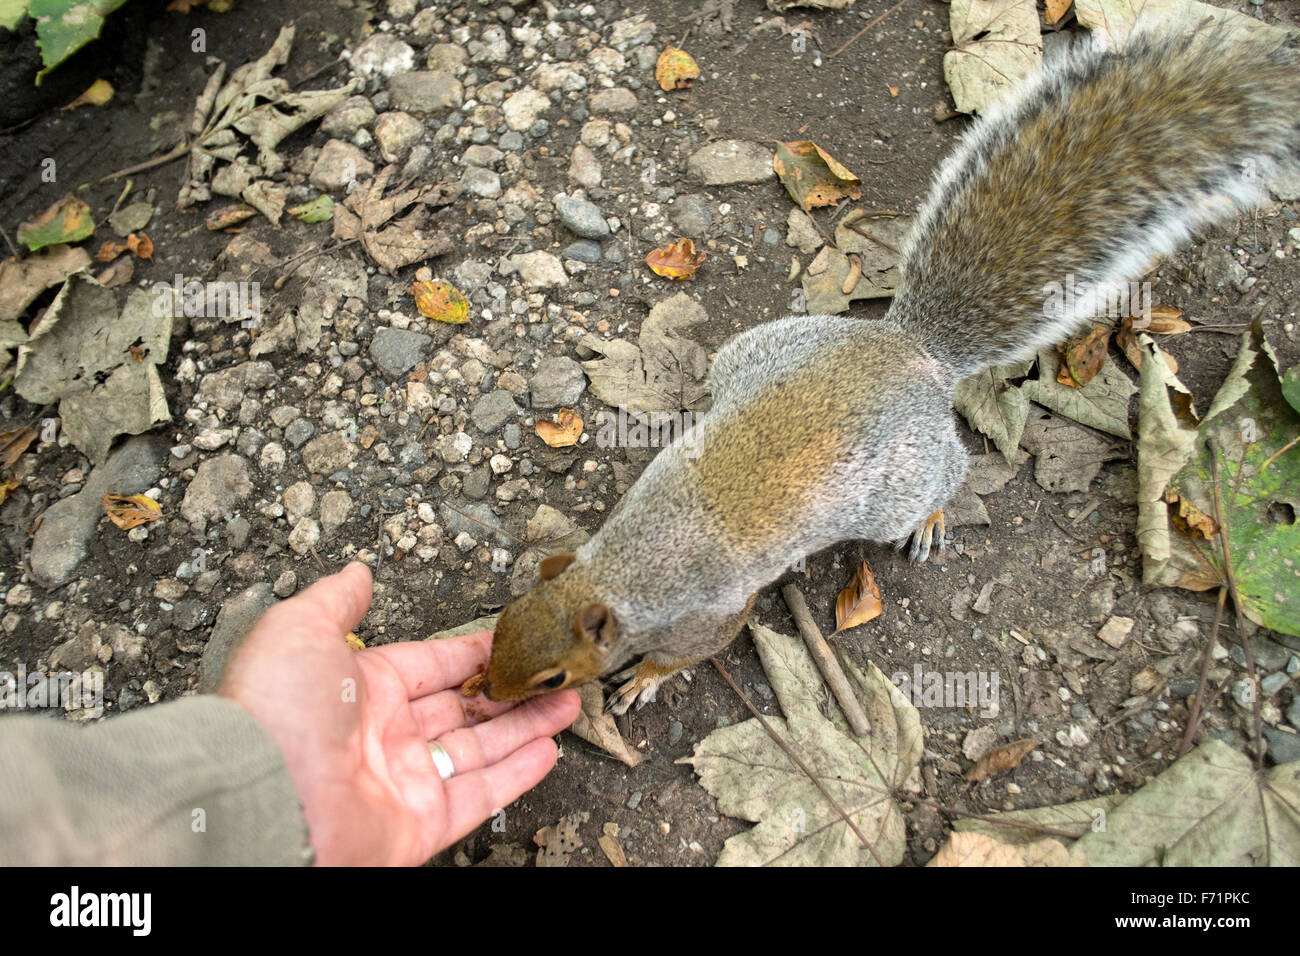 Bushy tailed European Grey Squirrel takes food from a person's hand Stock Photo